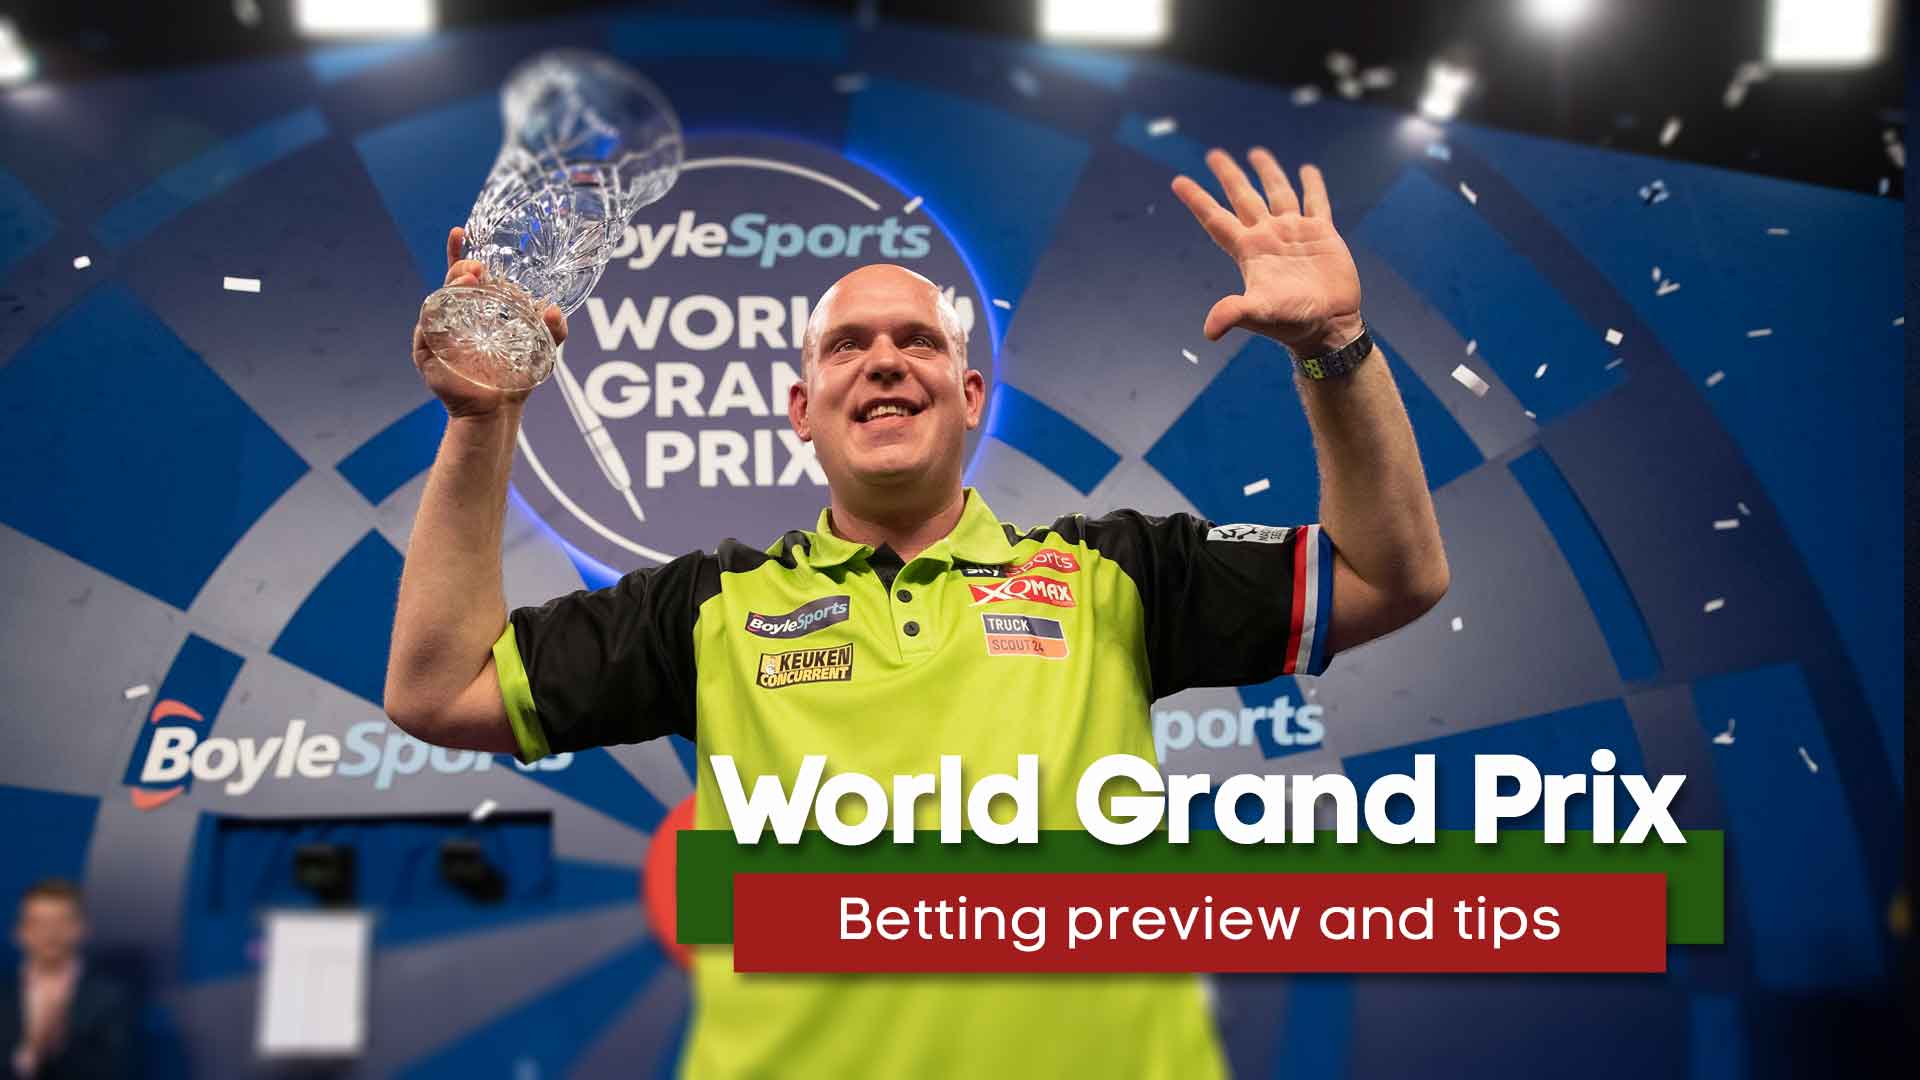 World Grand Prix 2020 Free darts betting tips, preview and predictions for the Sky Sports major featuring MVG, Gerwyn Price and Peter Wright